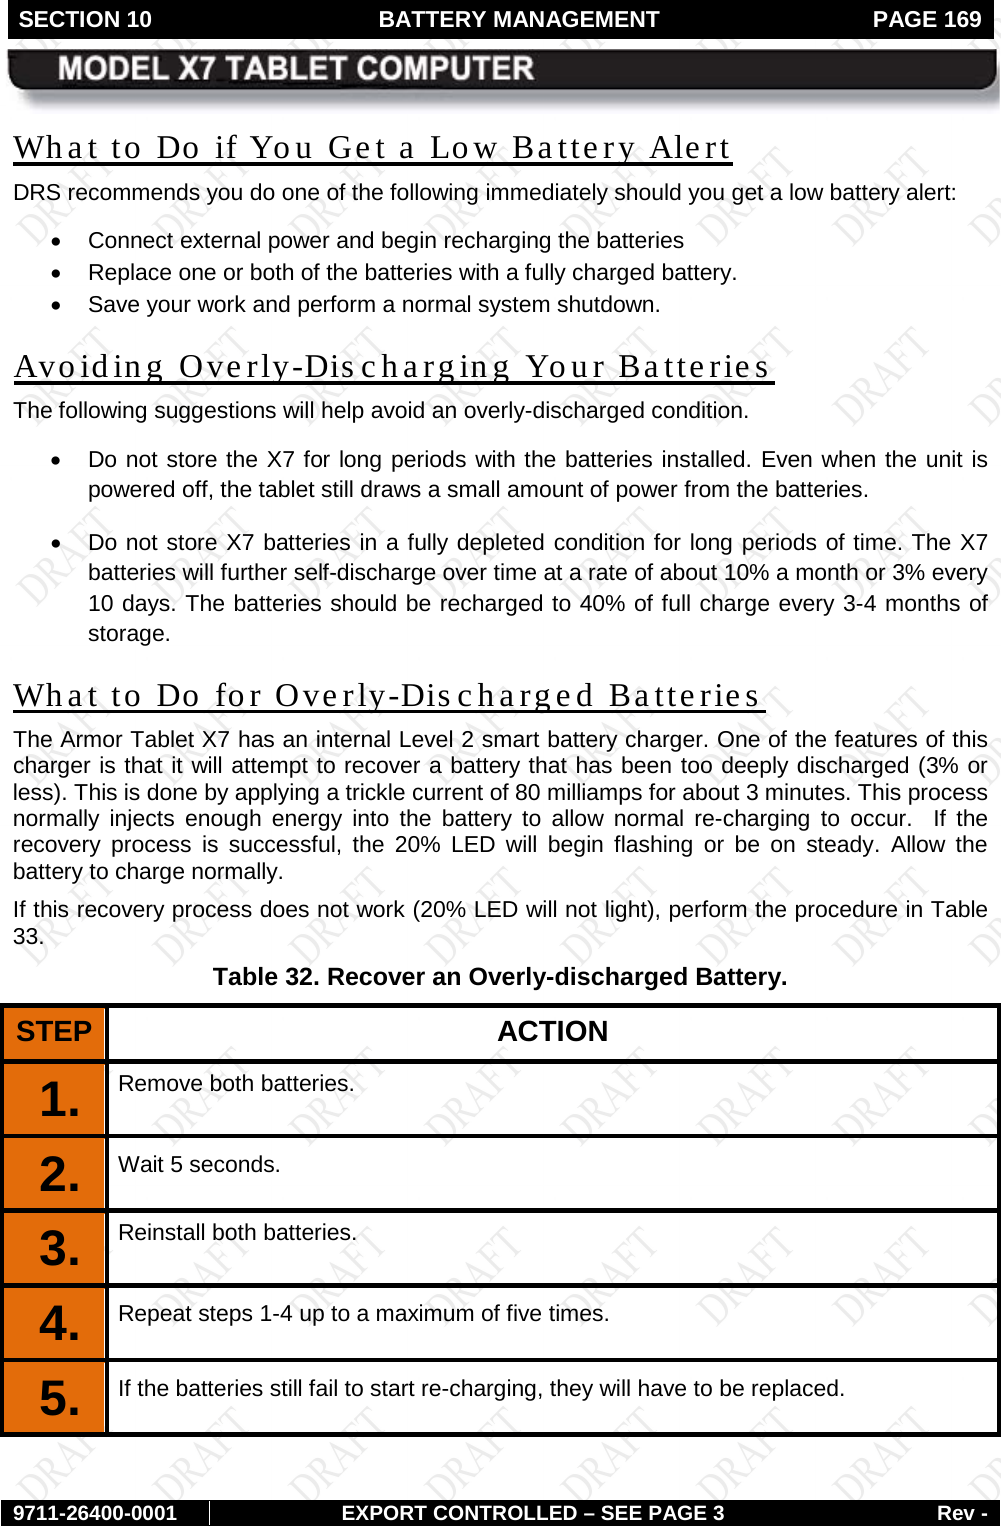 SECTION 10 BATTERY MANAGEMENT  PAGE 169        9711-26400-0001 EXPORT CONTROLLED – SEE PAGE 3 Rev - What to Do if You Get a Low Battery Alert DRS recommends you do one of the following immediately should you get a low battery alert: • Connect external power and begin recharging the batteries • Replace one or both of the batteries with a fully charged battery. • Save your work and perform a normal system shutdown. Avoiding Overly-Dis charging Your Batteries  The following suggestions will help avoid an overly-discharged condition. • Do not store the X7 for long periods with the batteries installed. Even when the unit is powered off, the tablet still draws a small amount of power from the batteries. • Do not store X7 batteries in a fully depleted condition for long periods of time. The X7 batteries will further self-discharge over time at a rate of about 10% a month or 3% every 10 days. The batteries should be recharged to 40% of full charge every 3-4 months of storage. What to Do for Overly-Discharged Batteries The Armor Tablet X7 has an internal Level 2 smart battery charger. One of the features of this charger is that it will attempt to recover a battery that has been too deeply discharged (3% or less). This is done by applying a trickle current of 80 milliamps for about 3 minutes. This process normally injects enough energy into the battery to allow normal re-charging to occur.  If the recovery process is successful, the 20% LED will begin flashing or be on steady.  Allow the battery to charge normally. If this recovery process does not work (20% LED will not light), perform the procedure in Table 33. Table 32. Recover an Overly-discharged Battery. STEP  ACTION 1.  Remove both batteries. 2.  Wait 5 seconds. 3.  Reinstall both batteries. 4.  Repeat steps 1-4 up to a maximum of five times. 5.  If the batteries still fail to start re-charging, they will have to be replaced. 